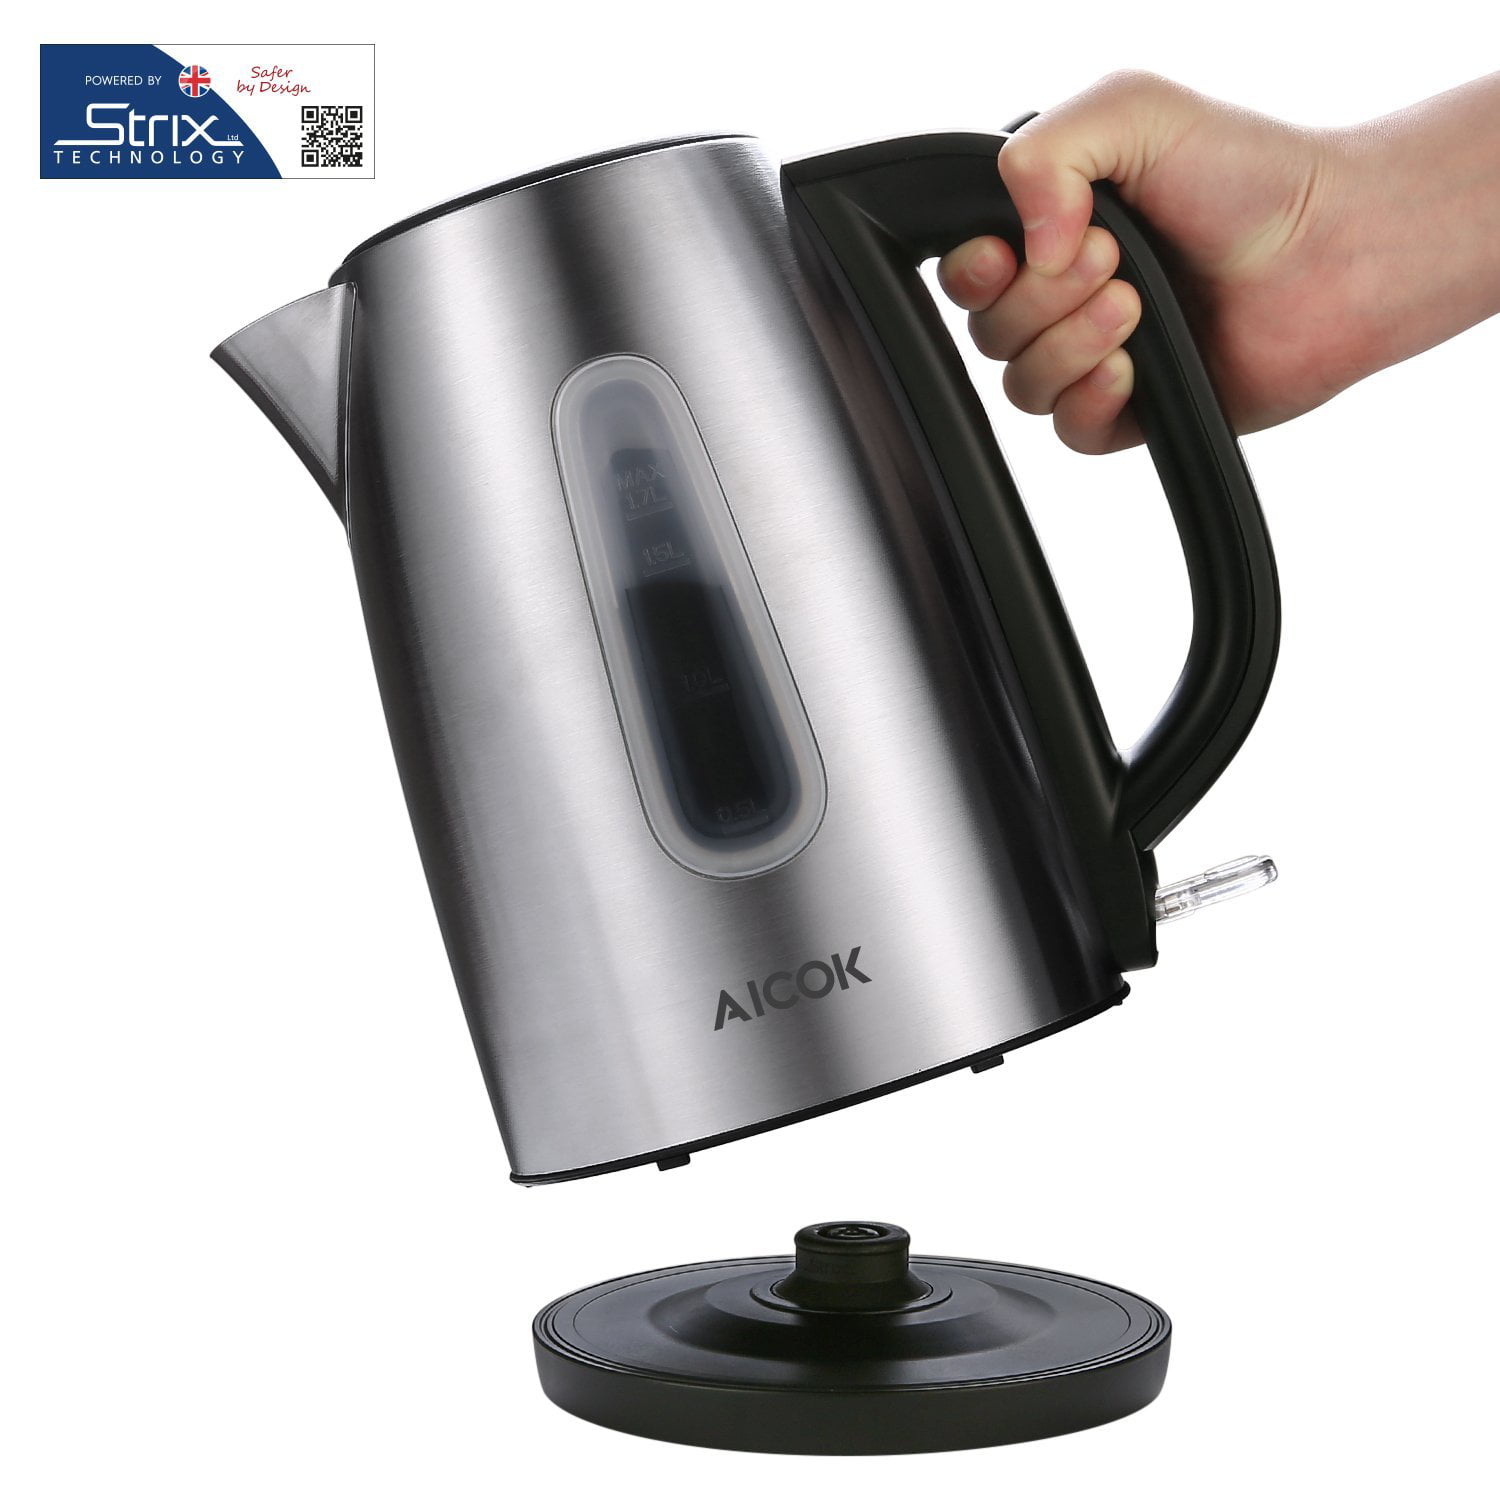 Yyh1.7l Glass Electric Kettle Fast Boiling Heater Automatic Kettle